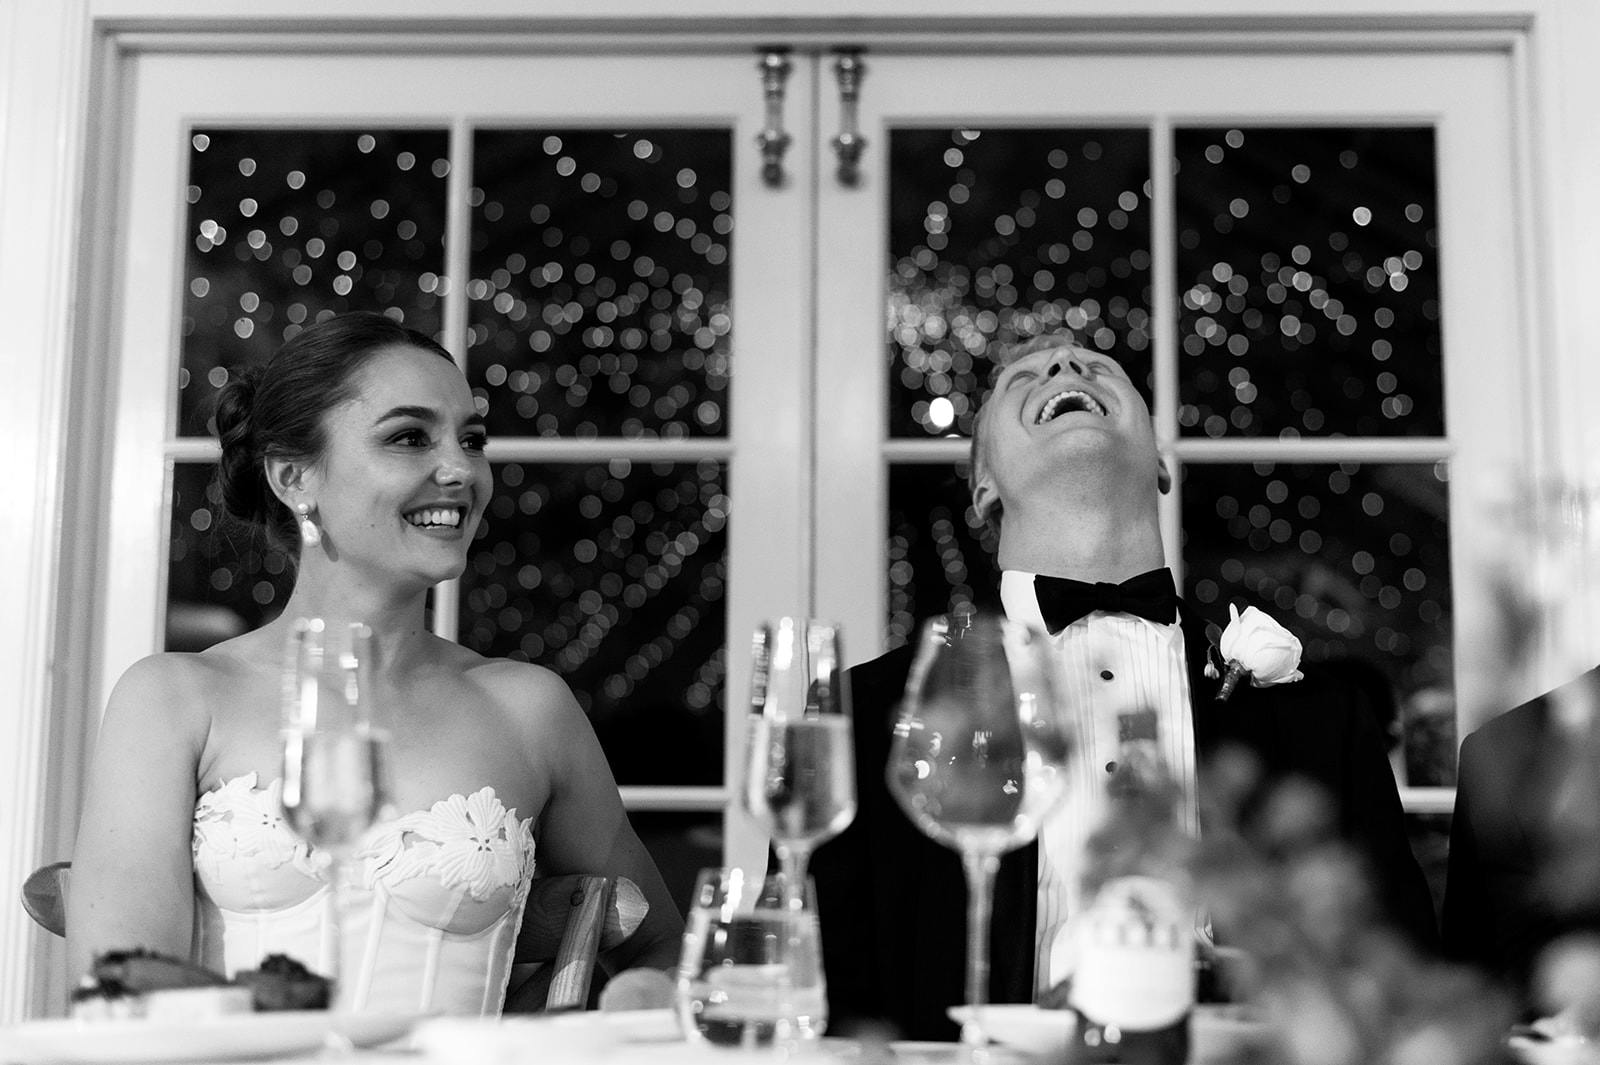 A black and white photo captures a joyous moment between a bride and groom. The bride, in a strapless dress, smiles warmly, while the groom, in a tuxedo, leans back laughing. The background features twinkling lights, creating a magical atmosphere.